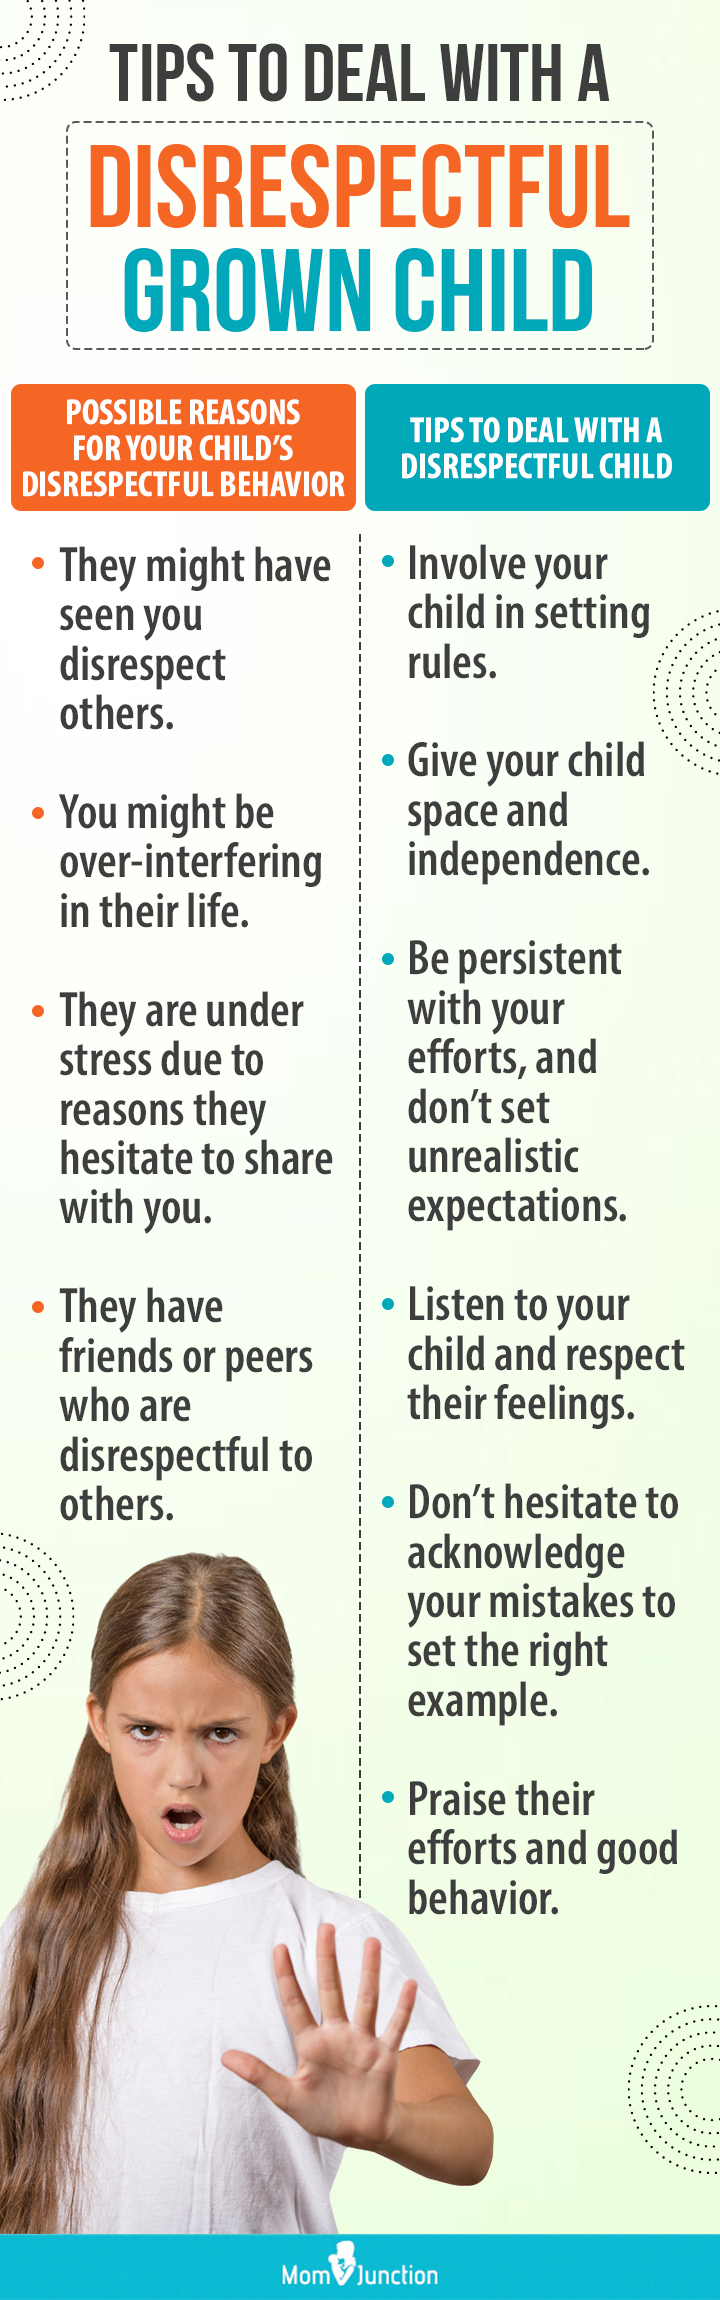 16 effective ways to deal with a disrespectful child